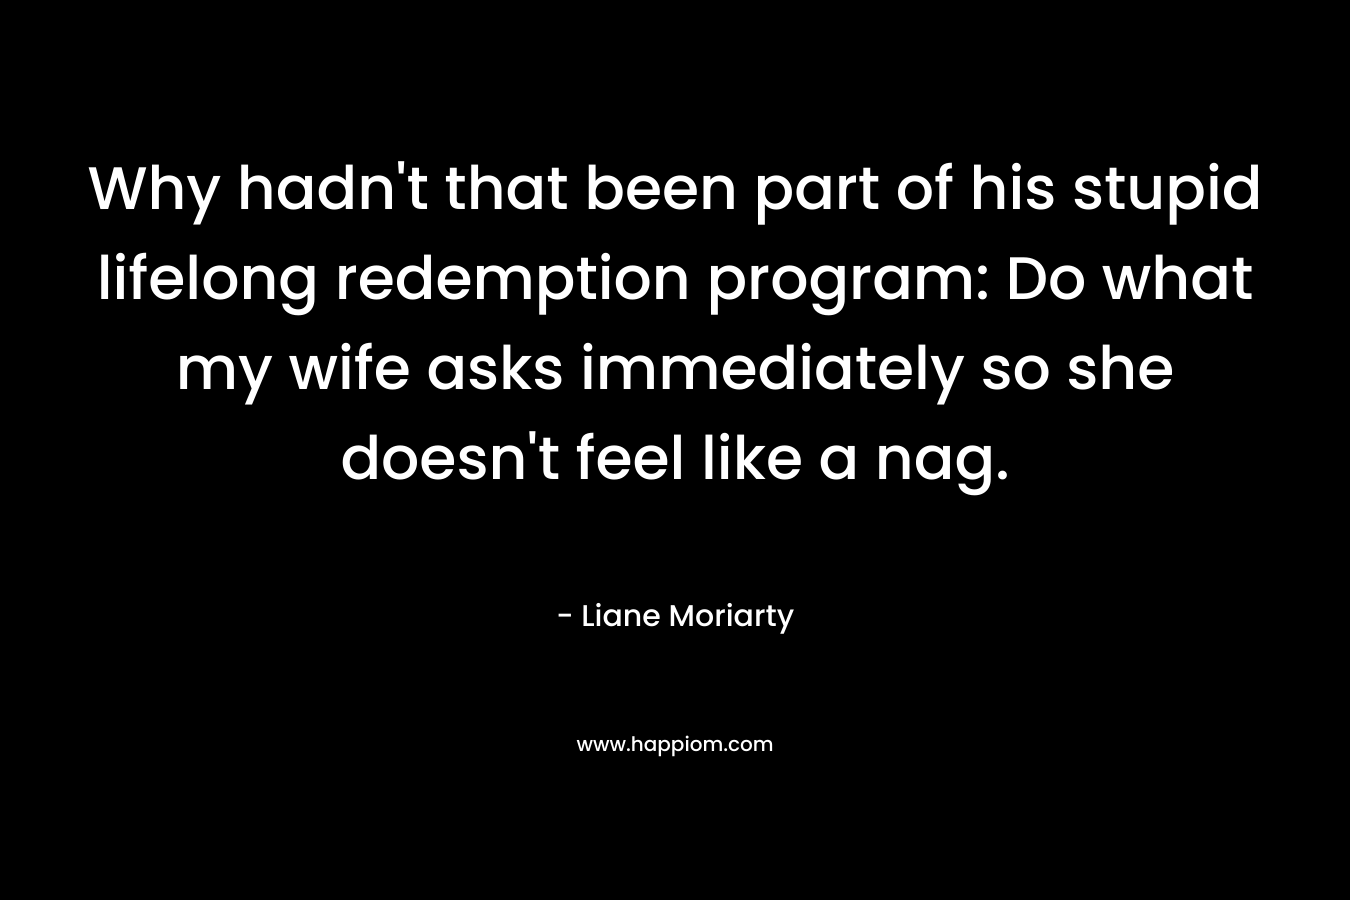 Why hadn’t that been part of his stupid lifelong redemption program: Do what my wife asks immediately so she doesn’t feel like a nag. – Liane Moriarty